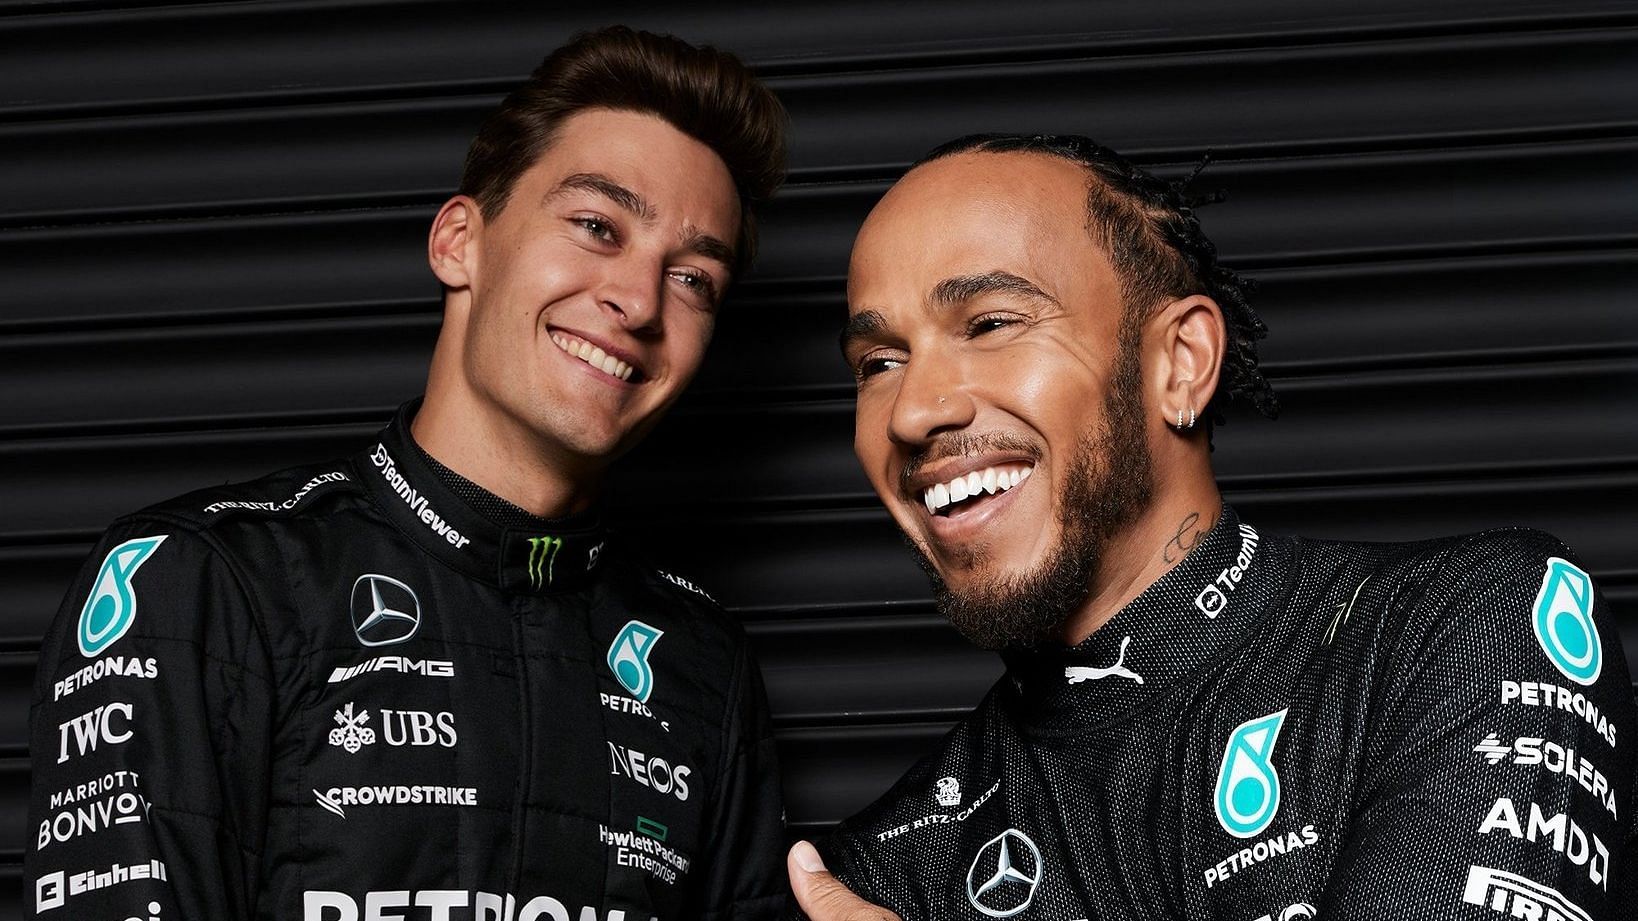 Lewis Hamilton makes a hilarious remark that sends George Russell and the fans cracking